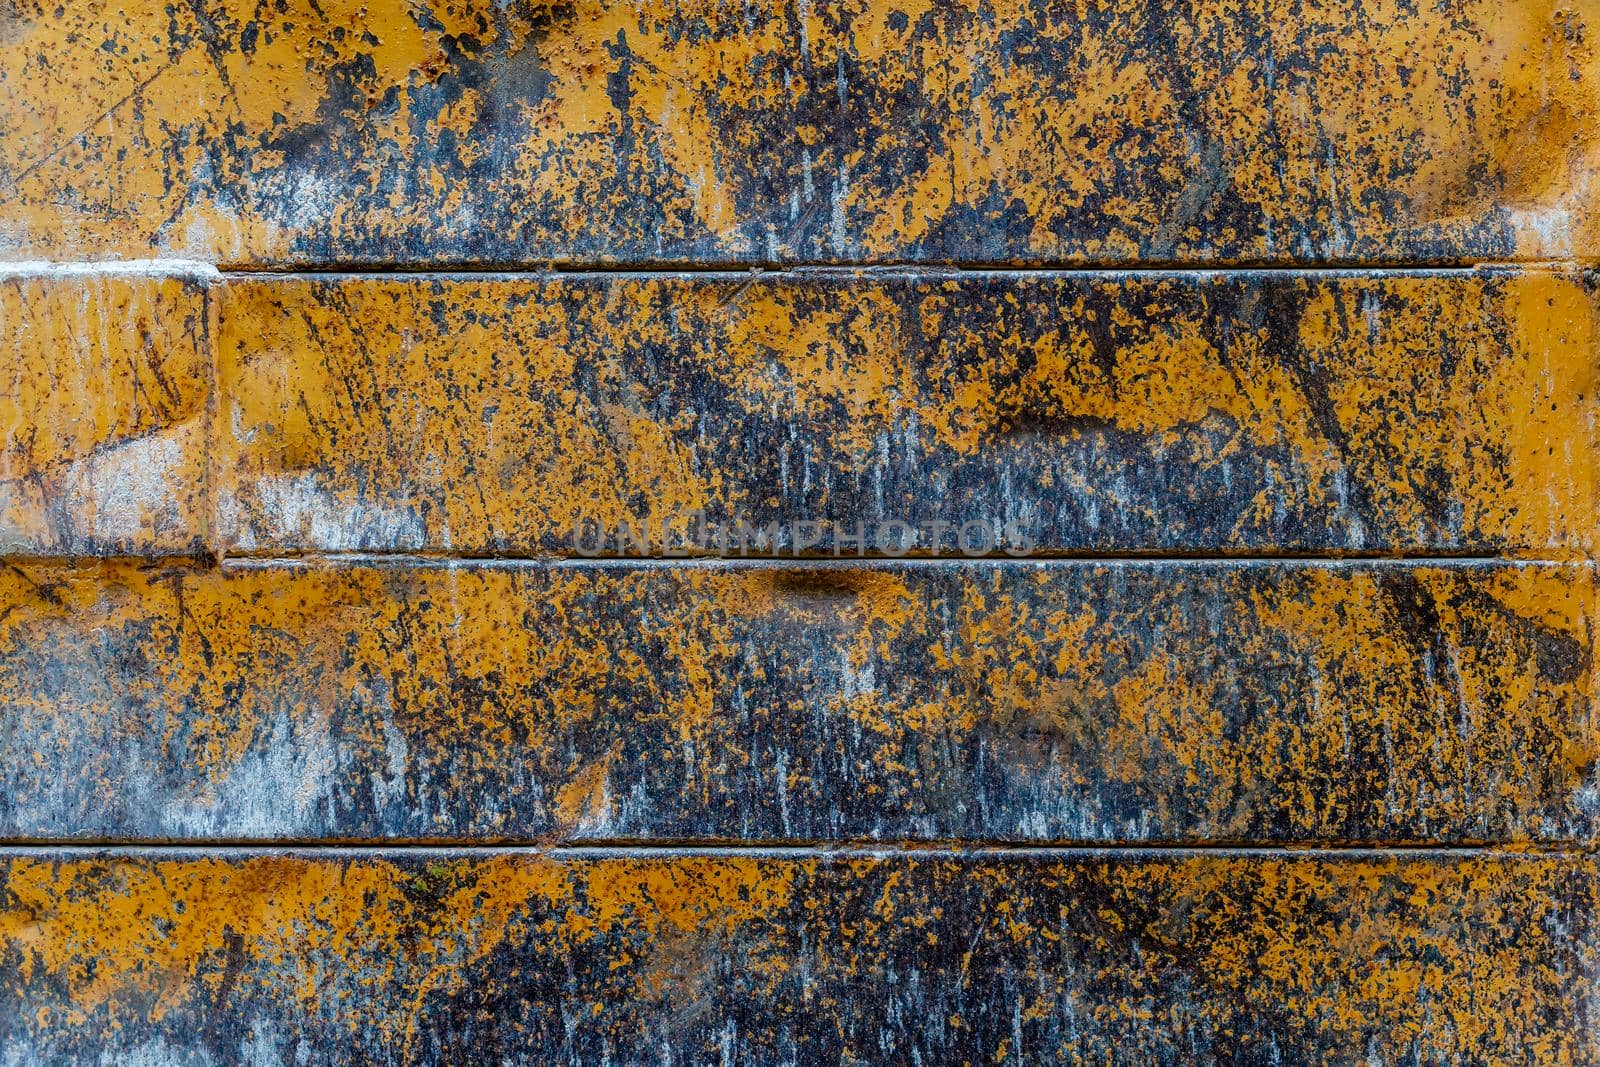 Grunge rusty metal texture background with patches of old yellow paint by Iryna_Melnyk